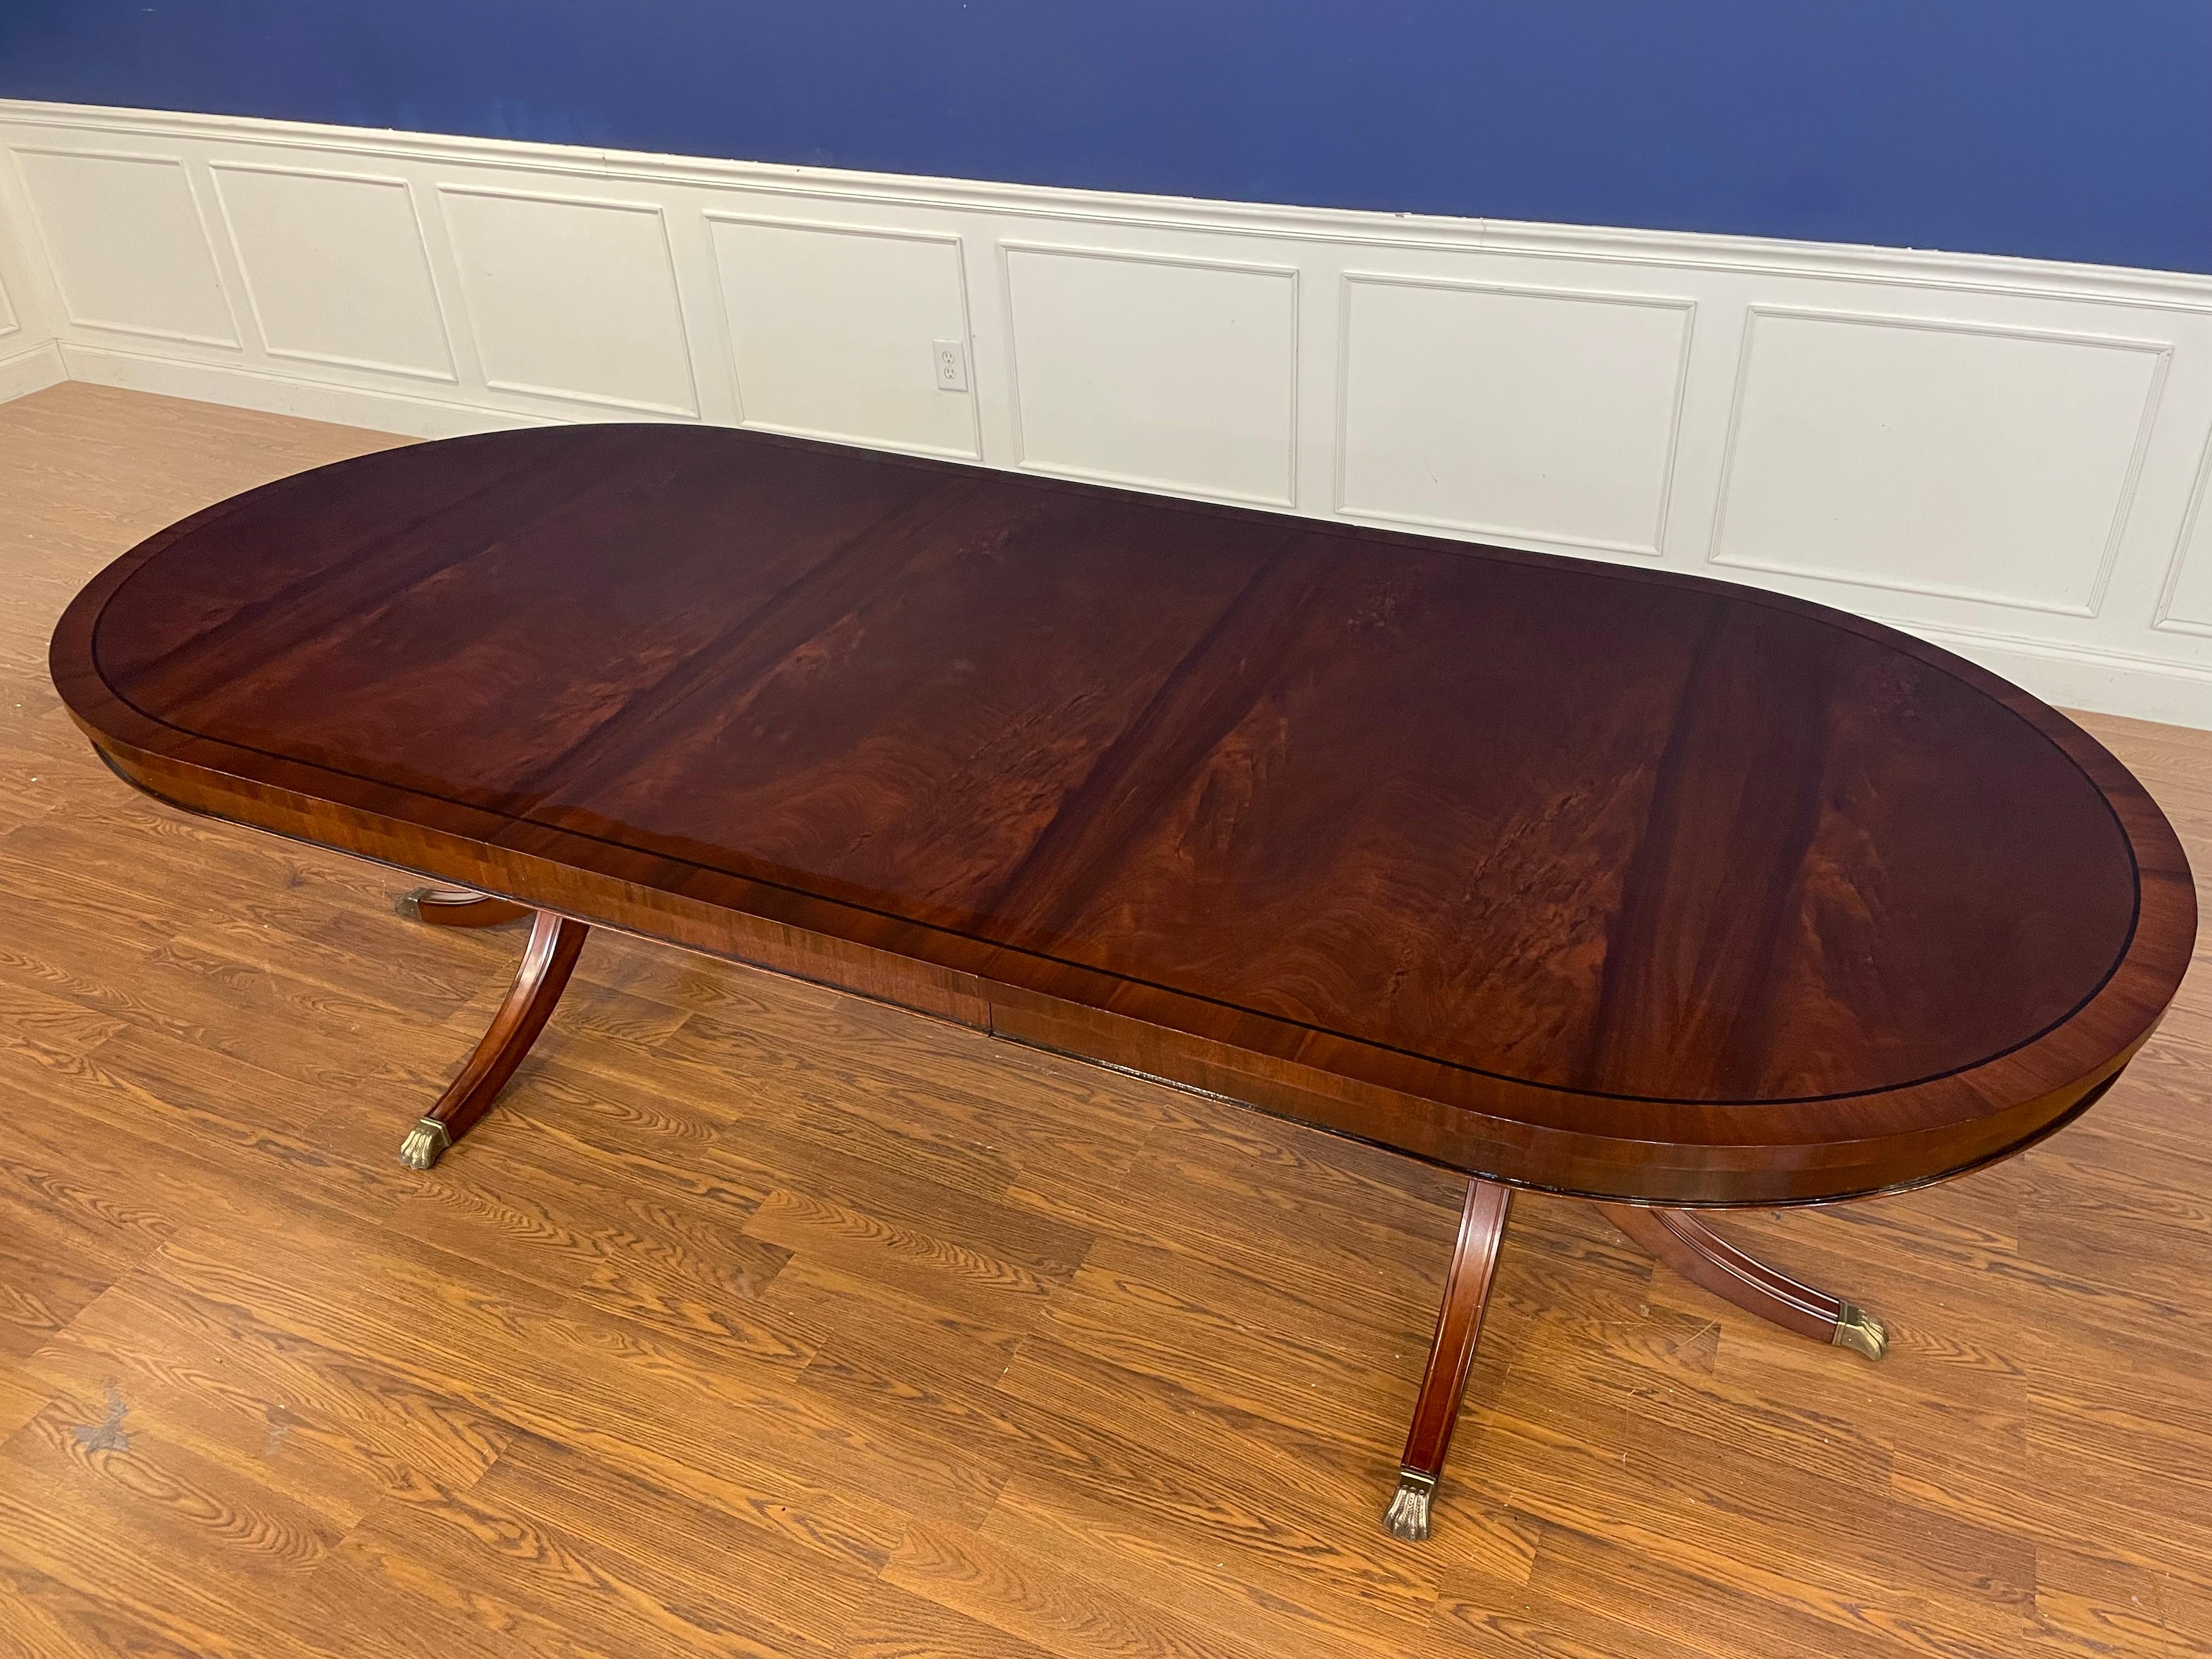 Sheraton Oval Mahogany Double Pedestal Dining Table by Leighton Hall Made-To-Order For Sale